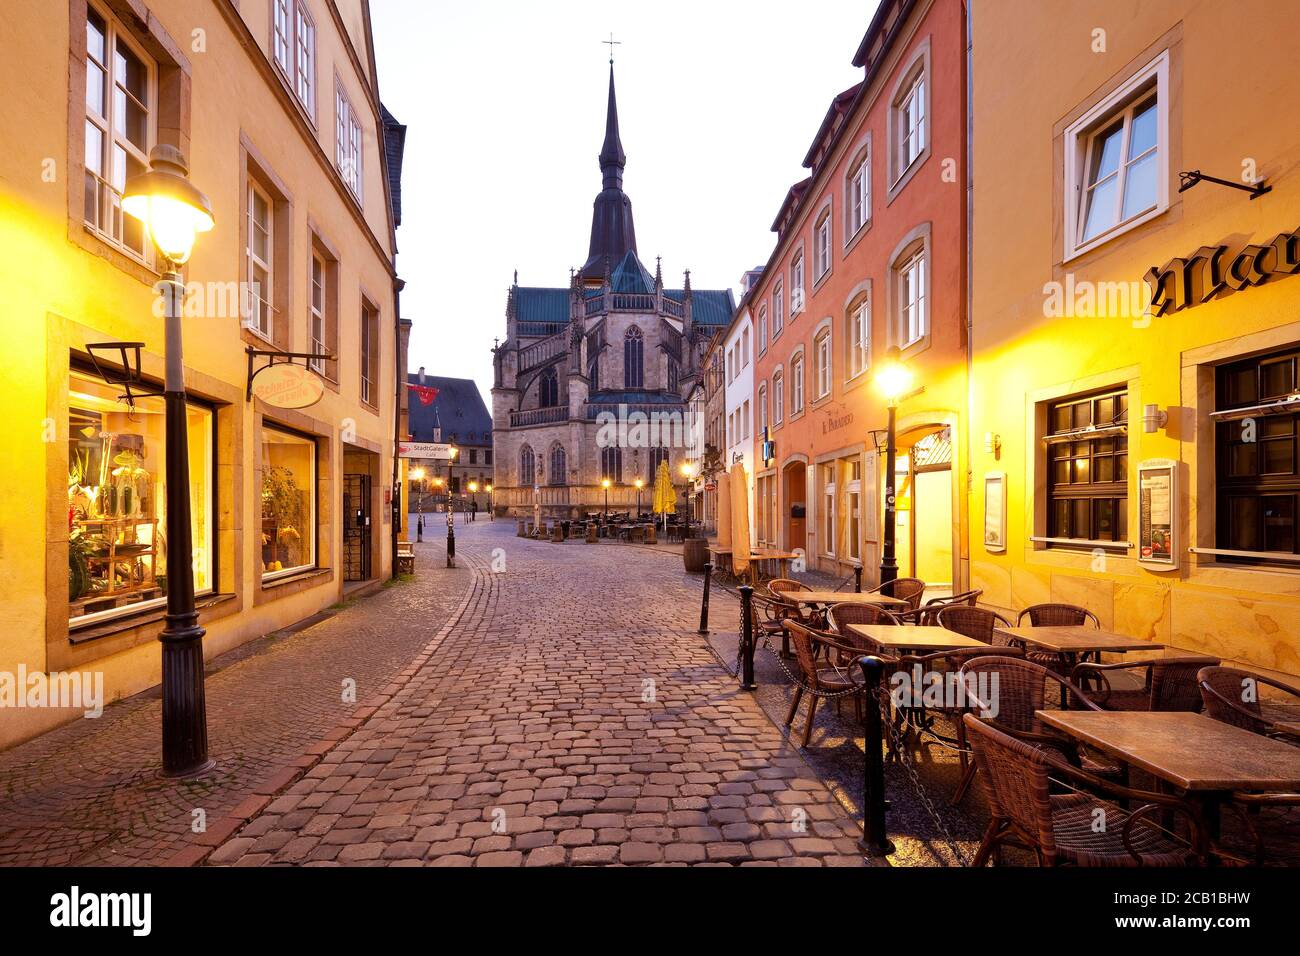 Old town with St. Marien am Abend church, Osnabrueck, Lower Saxony, Germany Stock Photo